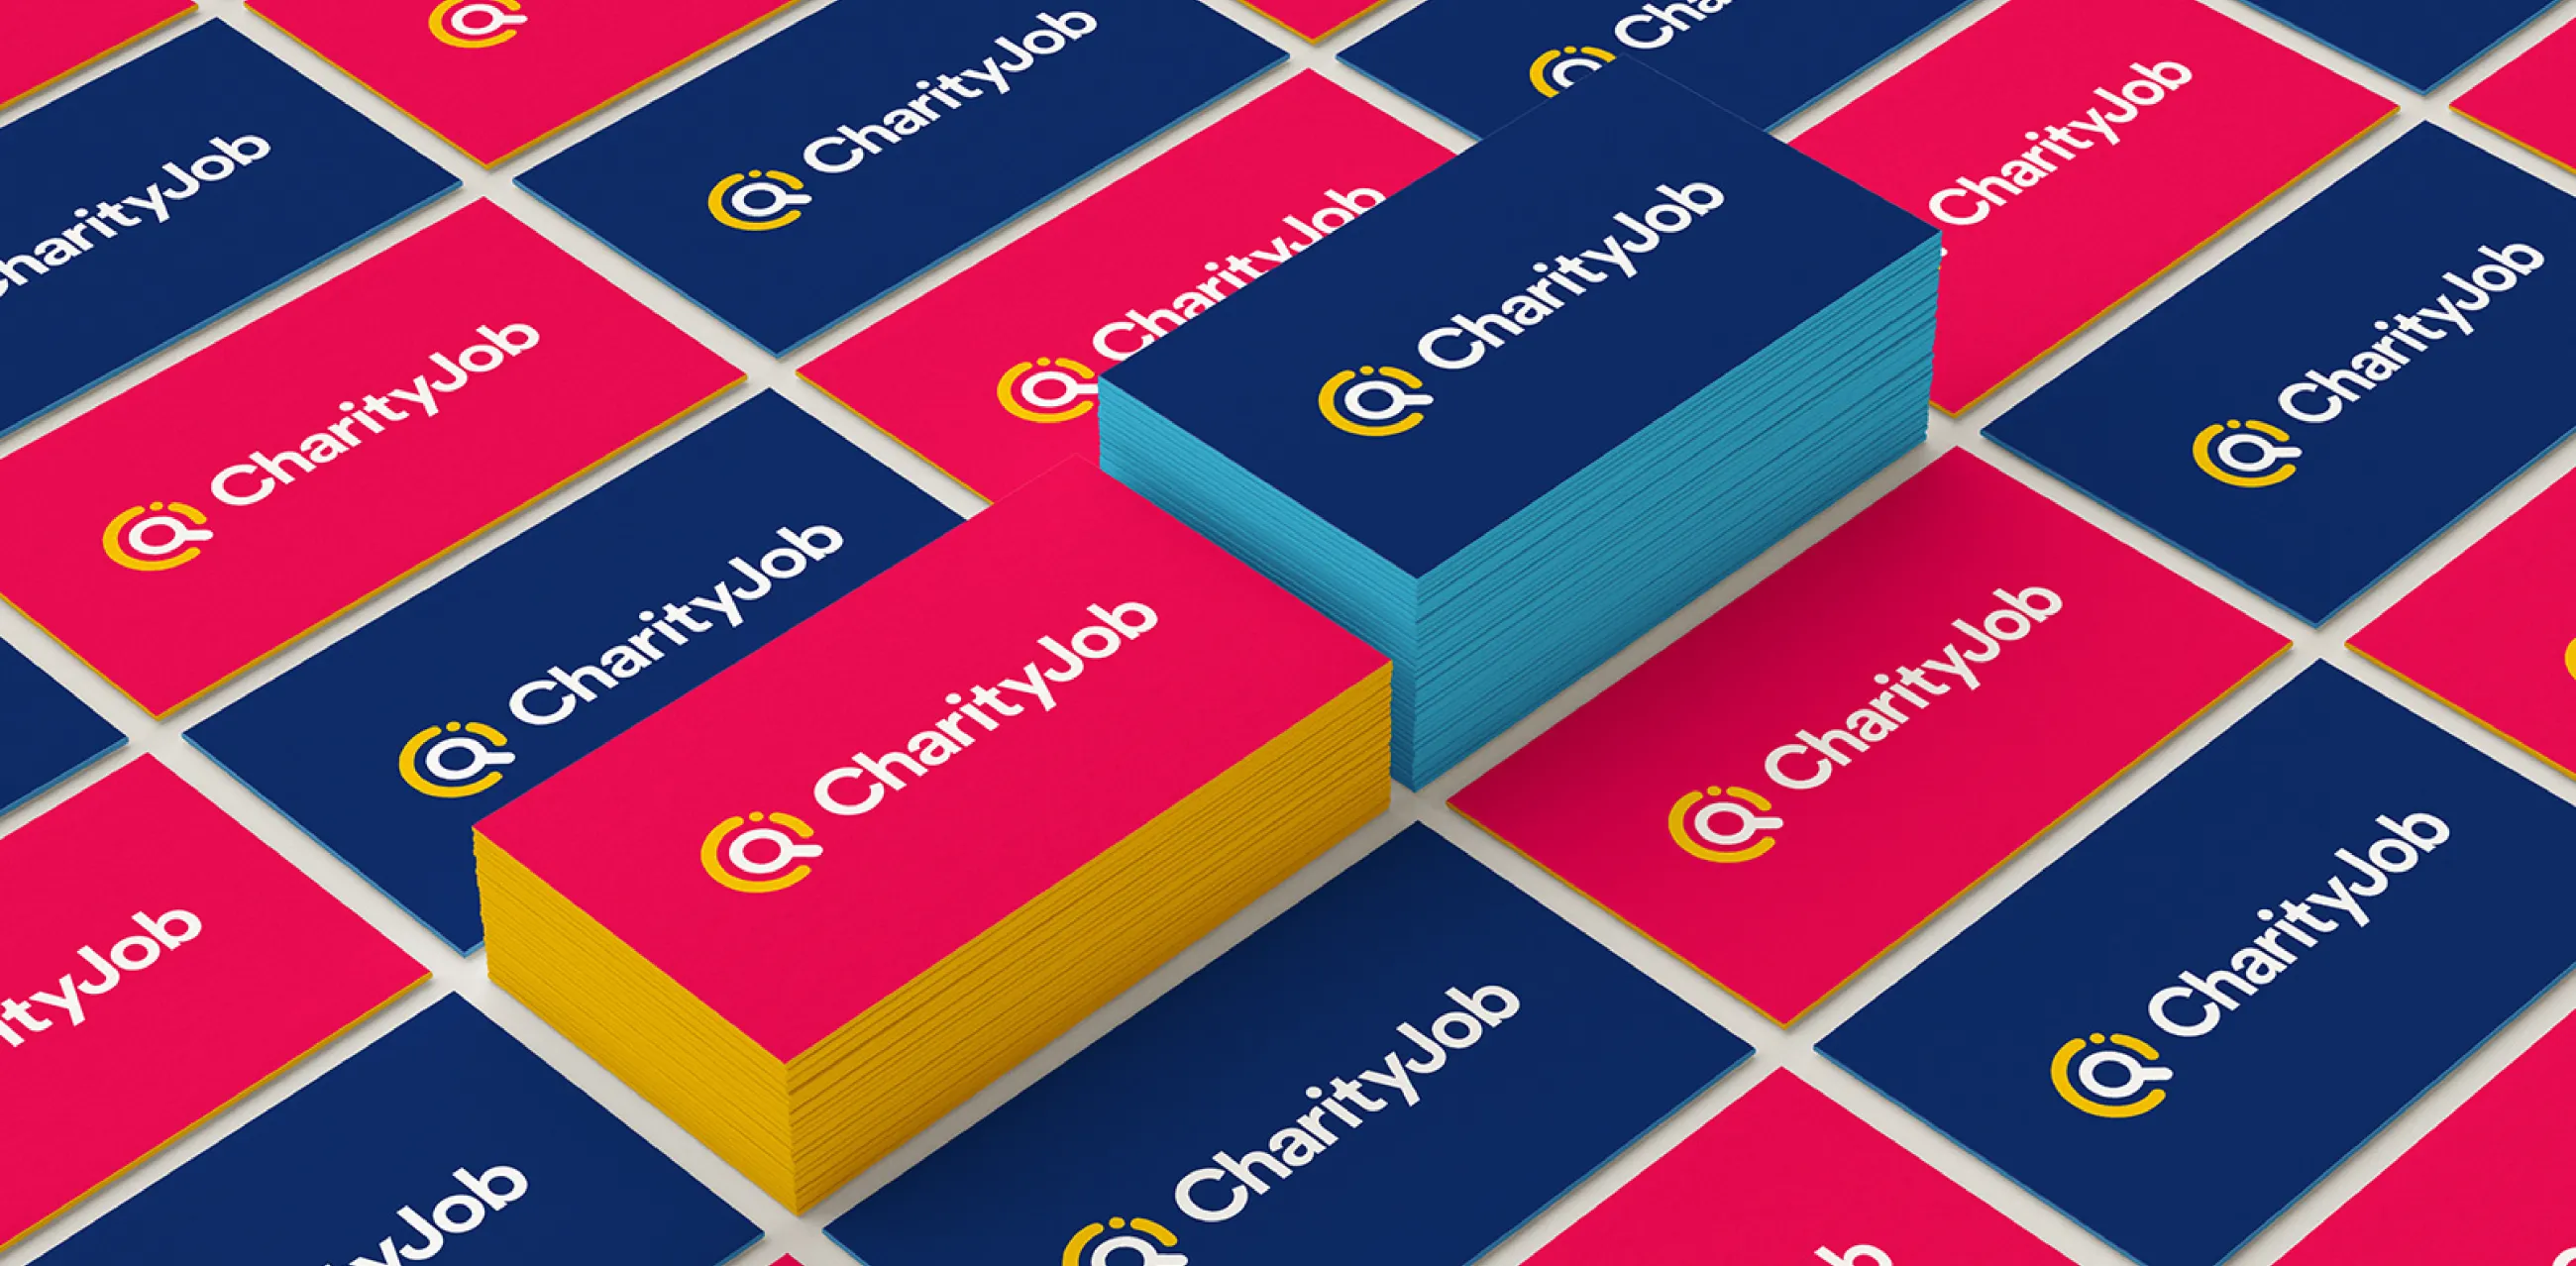 New CharityJob visual identity and logo shown on business cards